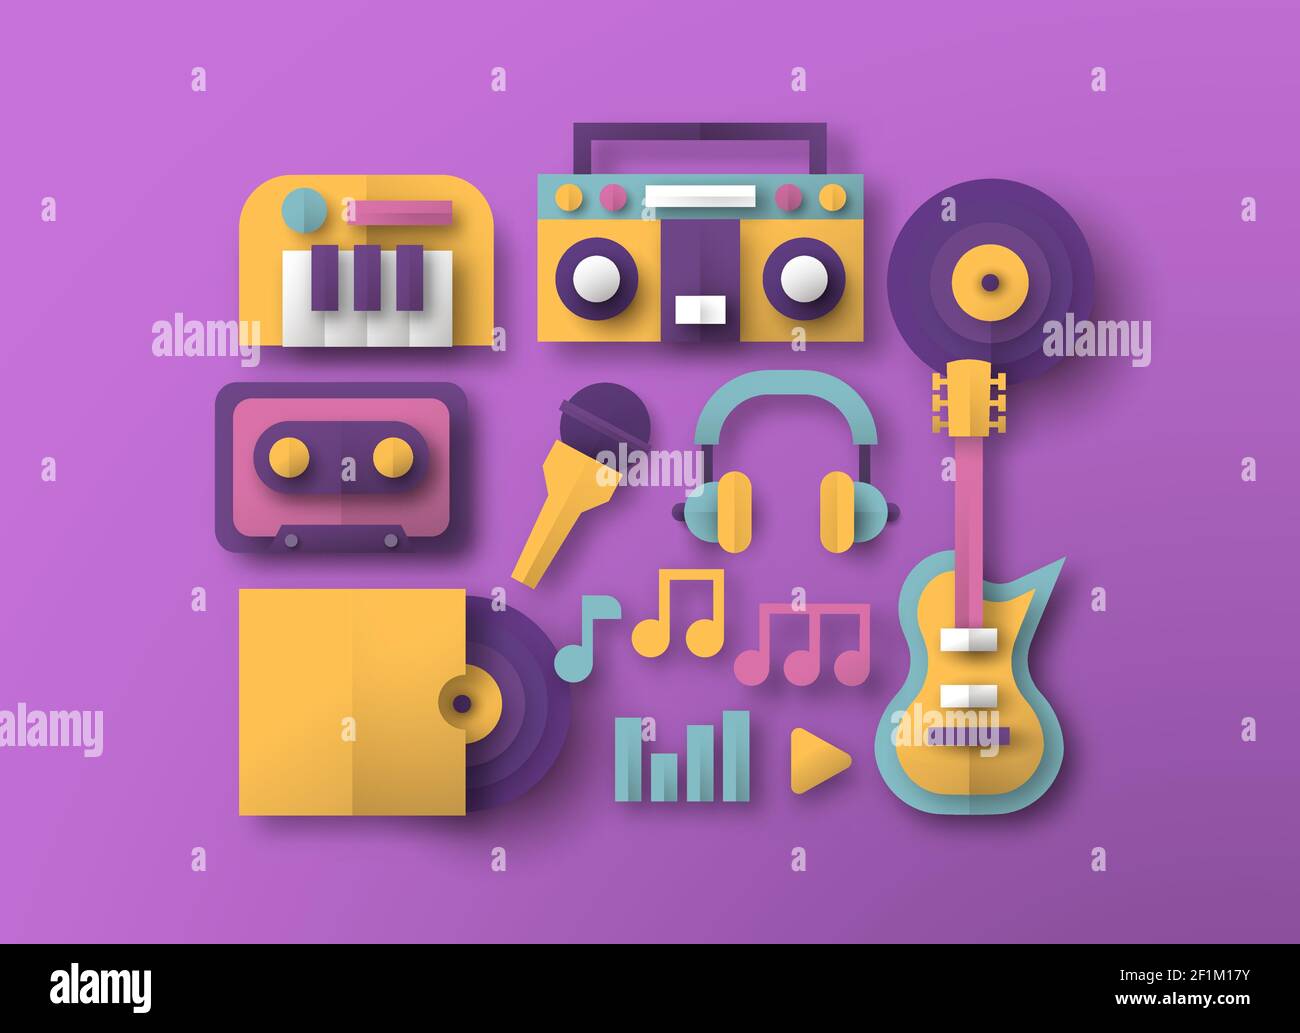 Colorful paper cut music icon collection, musical instrument and audio equipment set made in modern 3d papercut craft style. Includes retro vinyl, pia Stock Vector